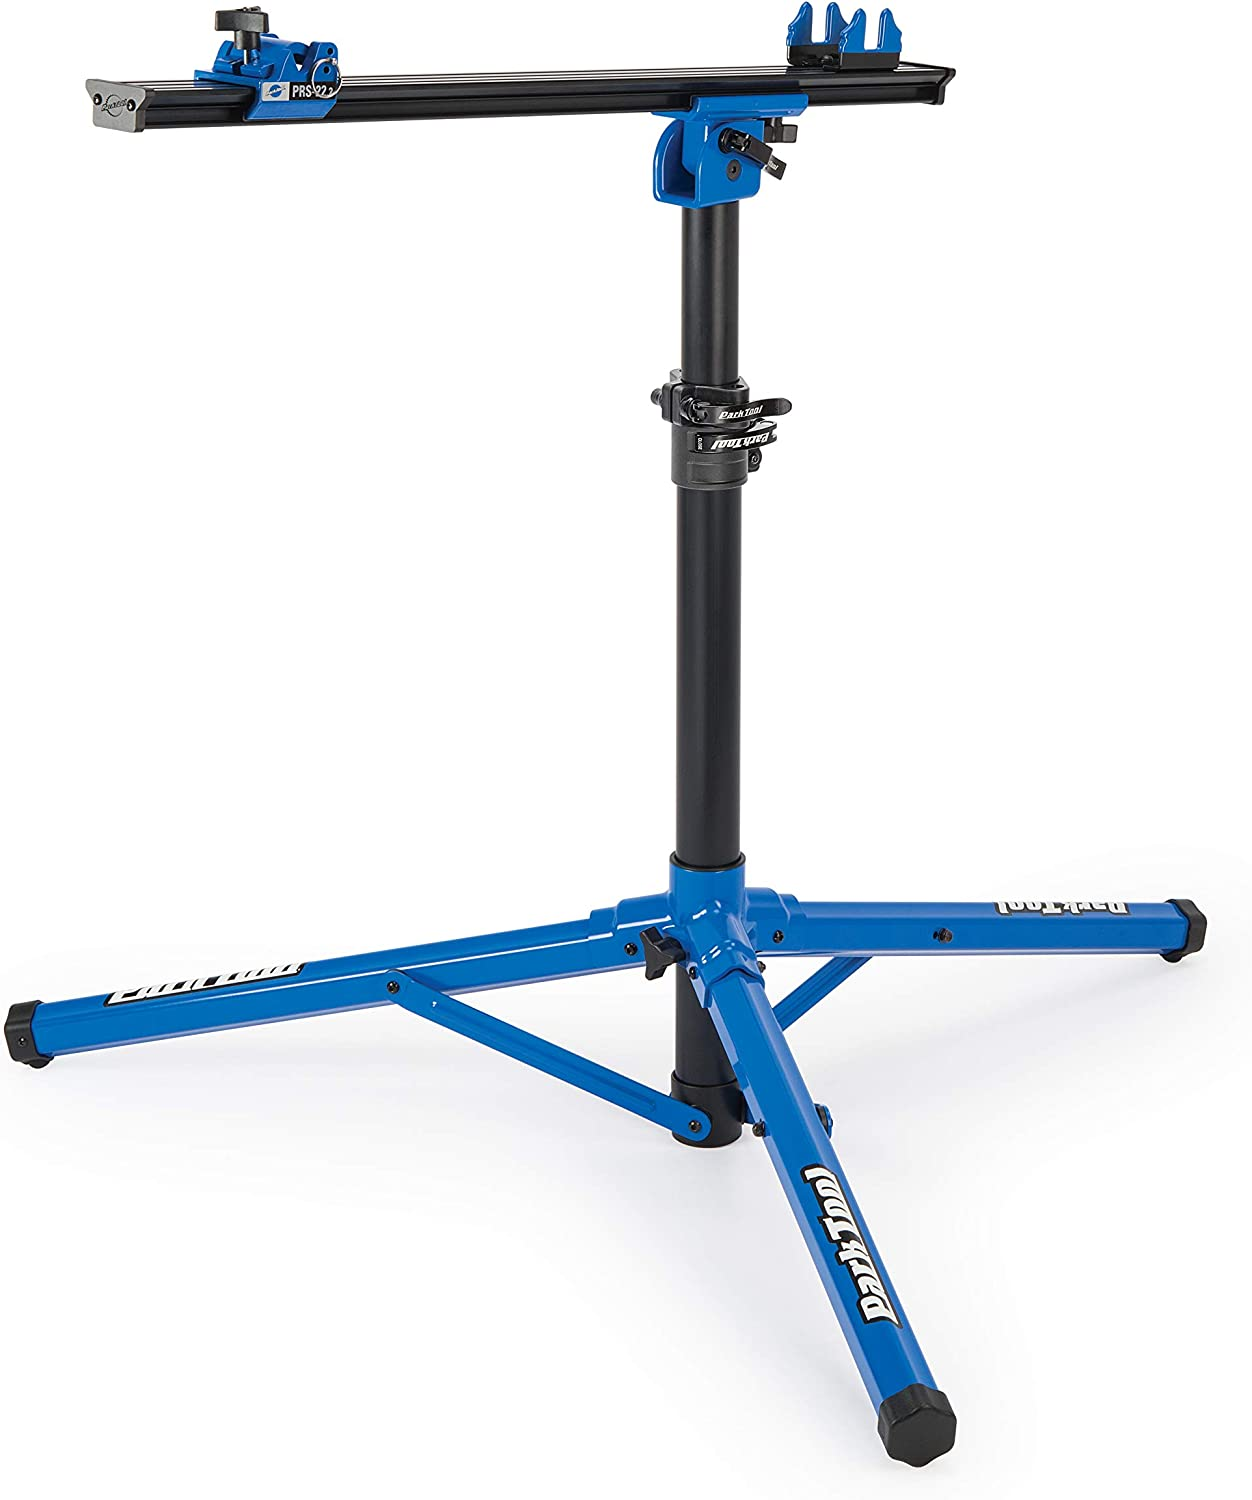 A bike stand is an essential part of an accessories and tool kit as it makes mountain bike maintenance so much easier.